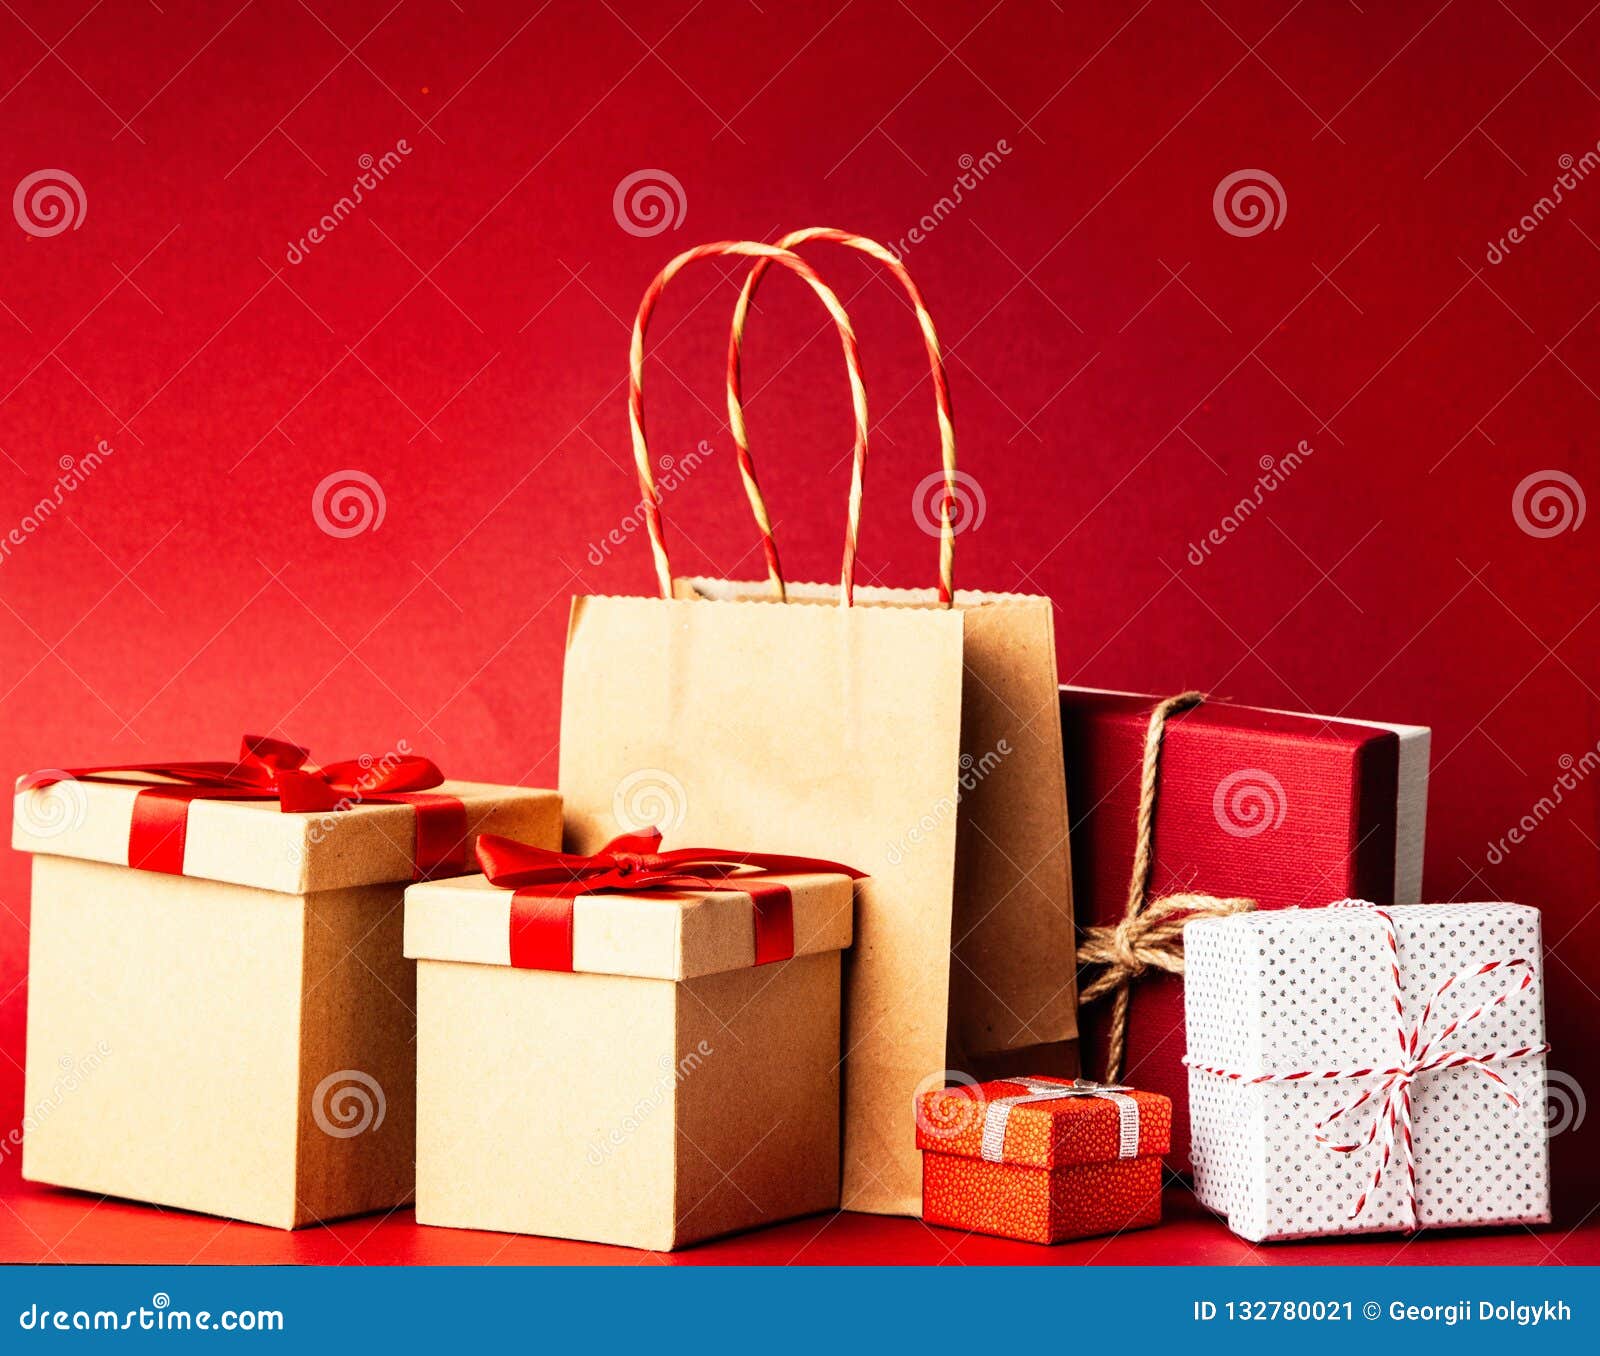 Gift Boxes on Red Background Stock Image - Image of wrap, present ...